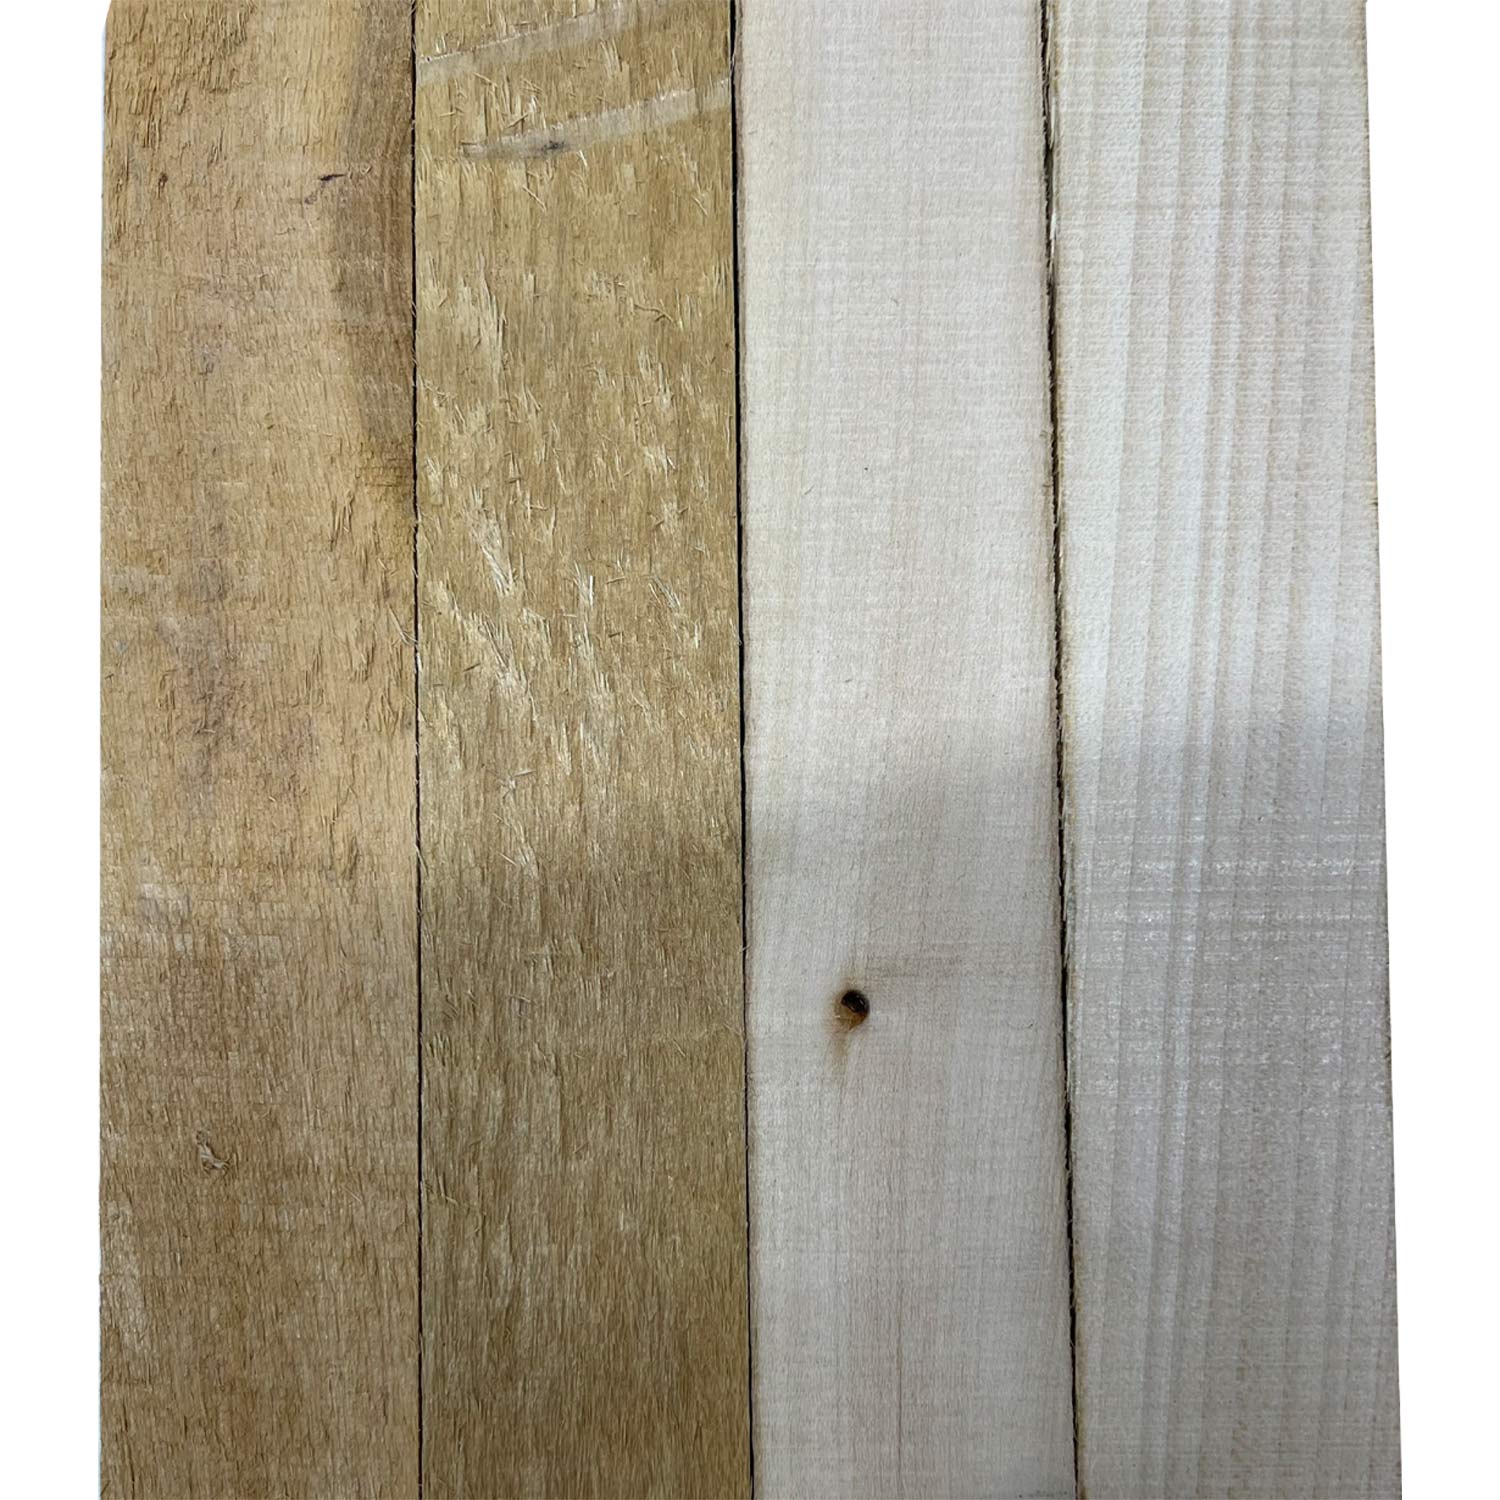 15 Pound Box of Basswood Wood Cut-Offs - 1/4&quot; - 3/4&quot; Thick pieces - Exotic Wood Zone - Buy online Across USA 